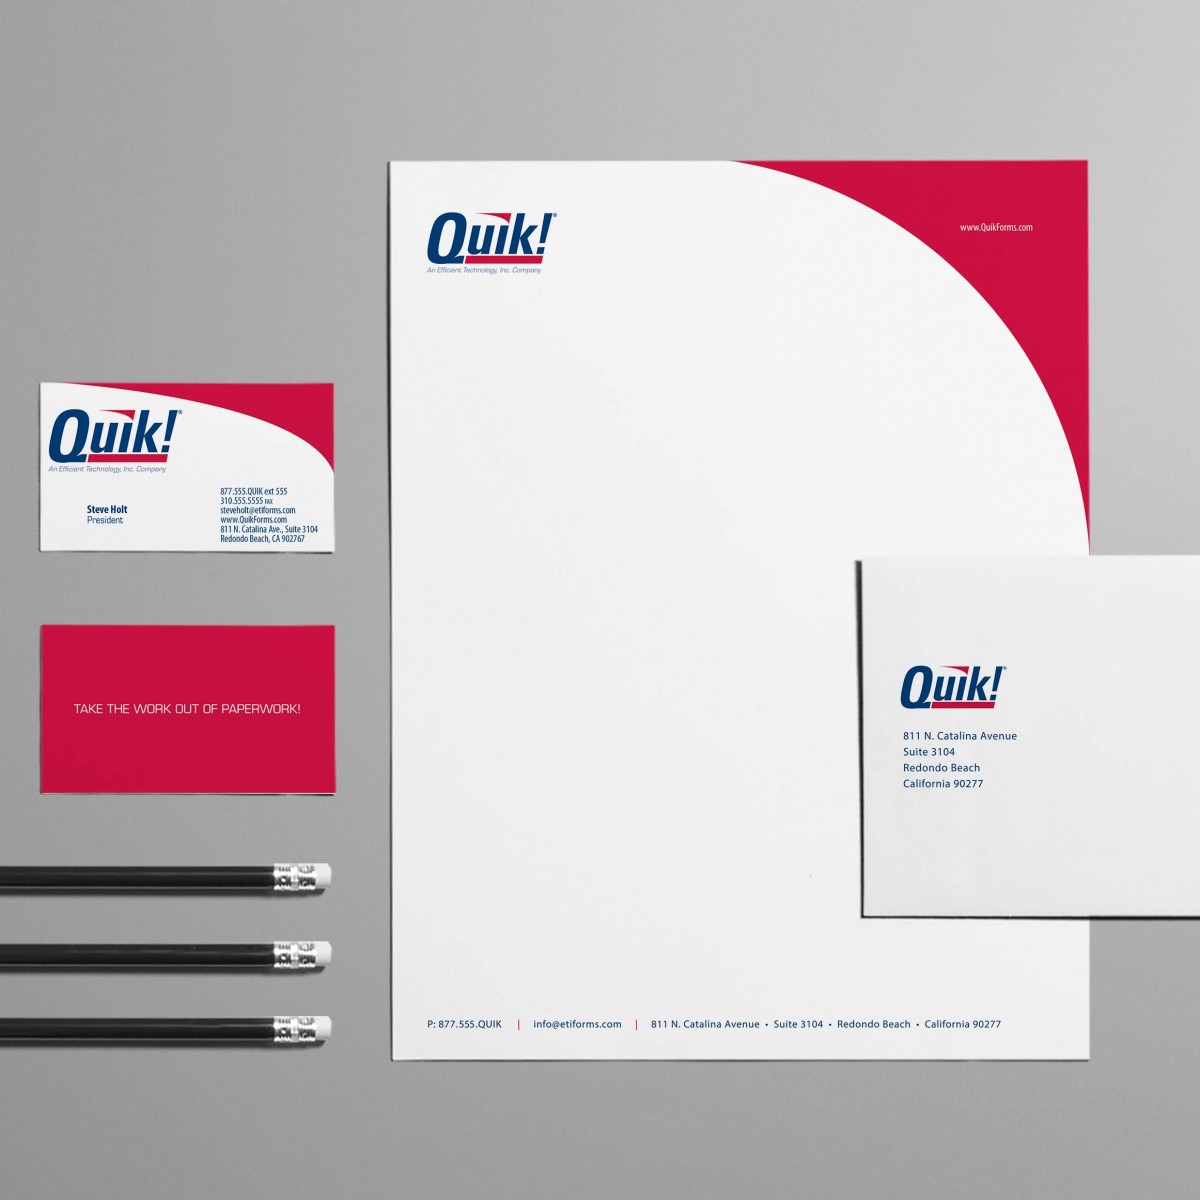 Quik! stationery system